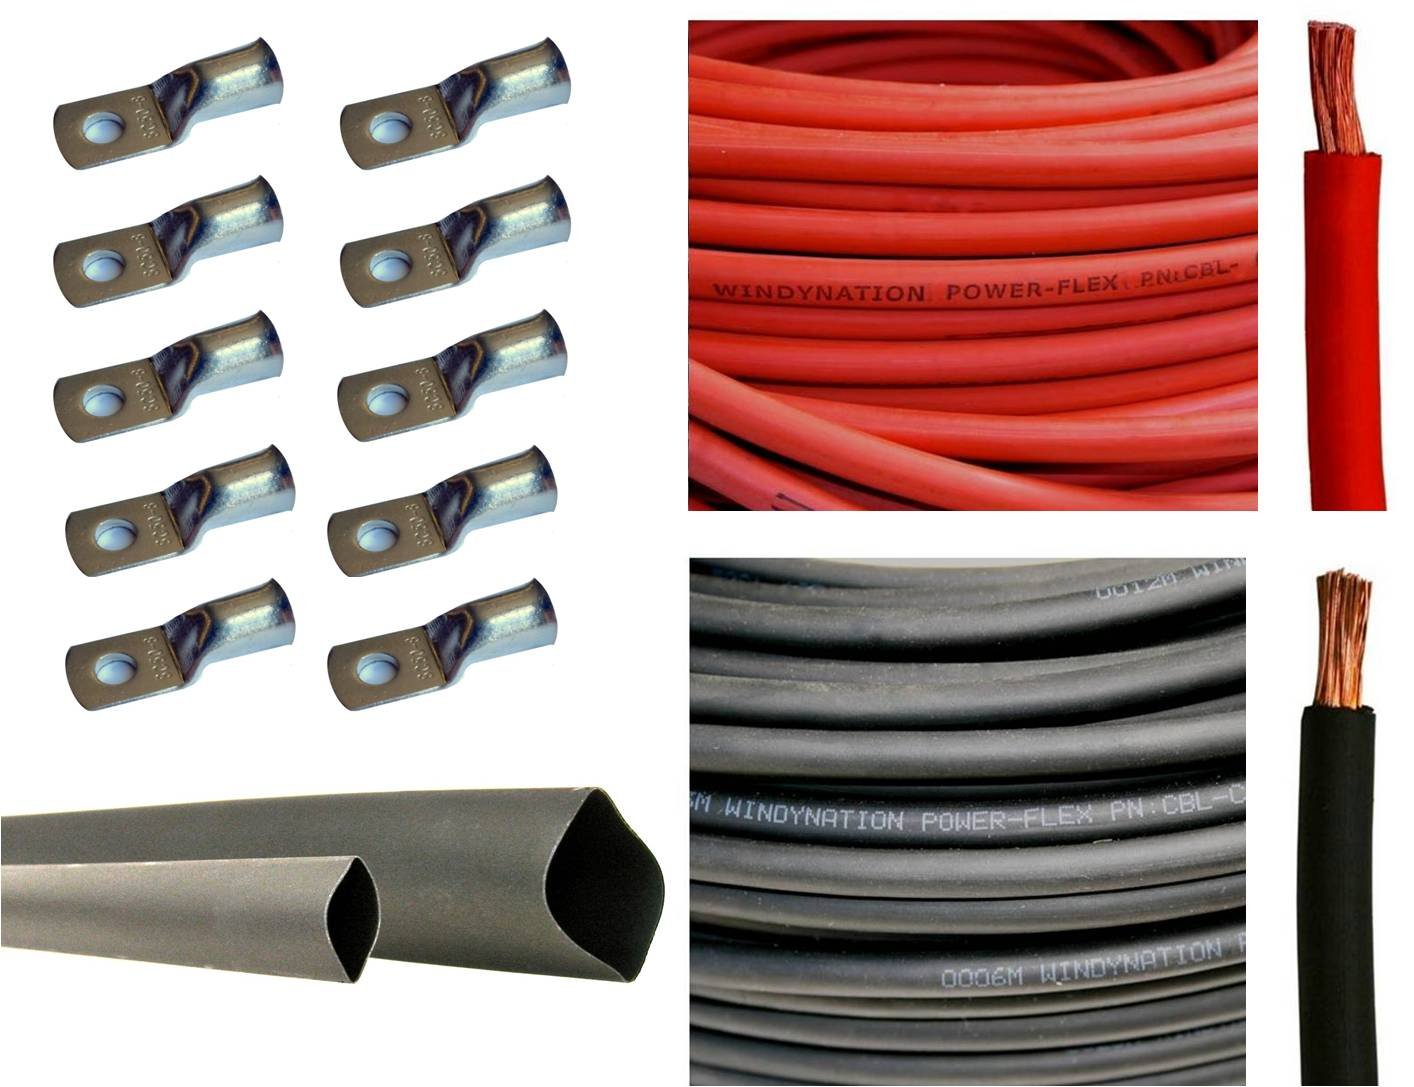 WindyNation Wni 20 Awg 20 Gauge 40 Feet Black 40 Feet Red Battery Welding Pure Copper Ultra Flexible Cable 5Pcs Of 516 5Pcs 38 Copper Cable